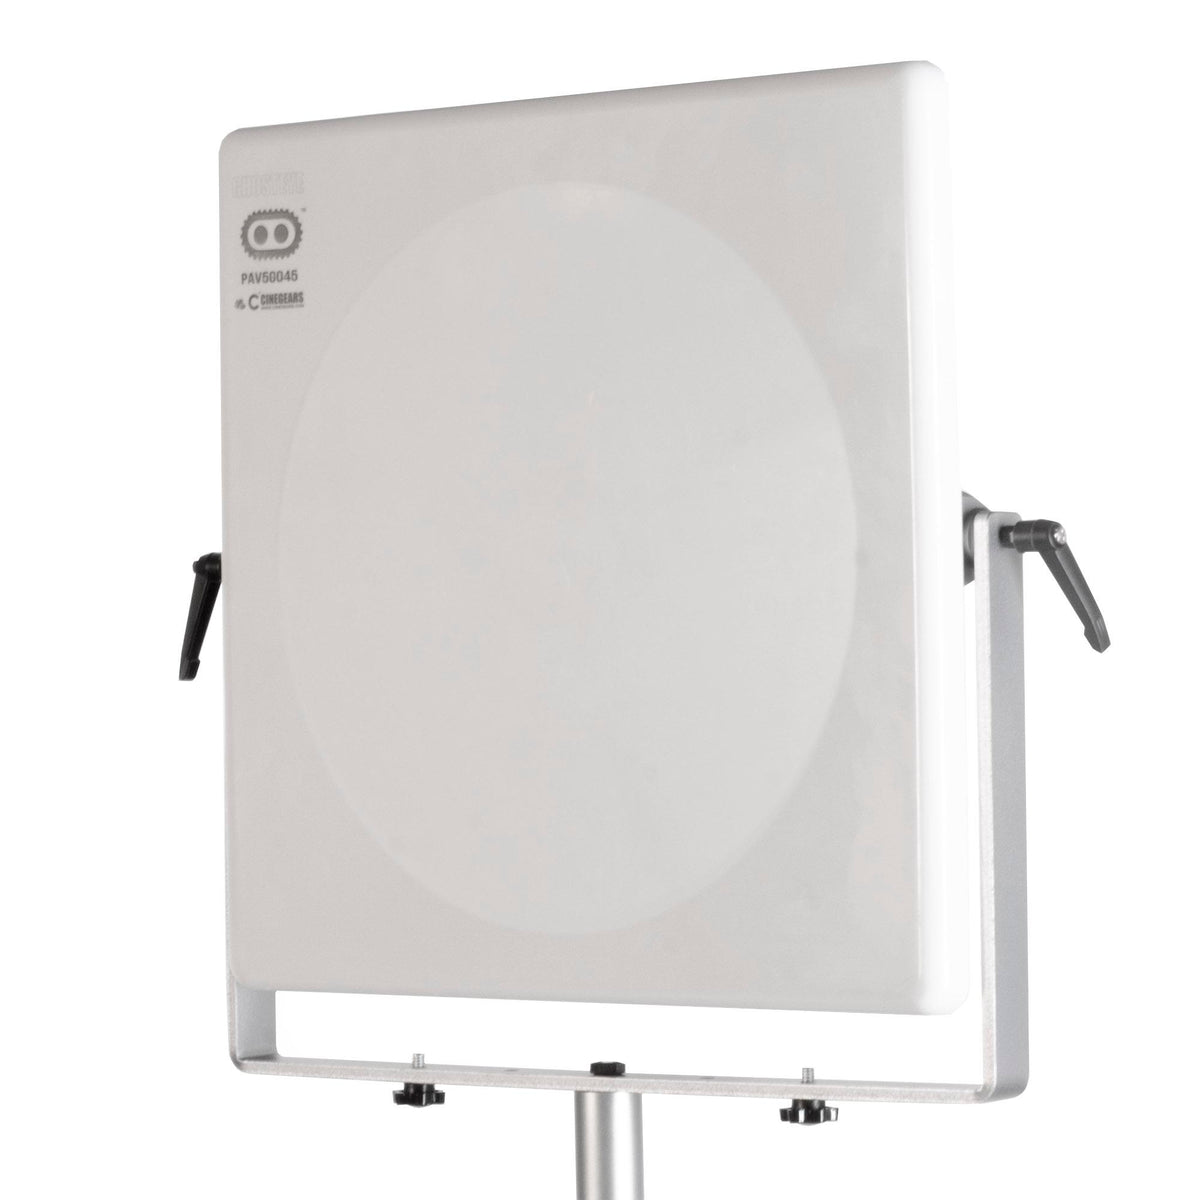 5G Extra Large Panel Antenna for Wireless Video 50cm